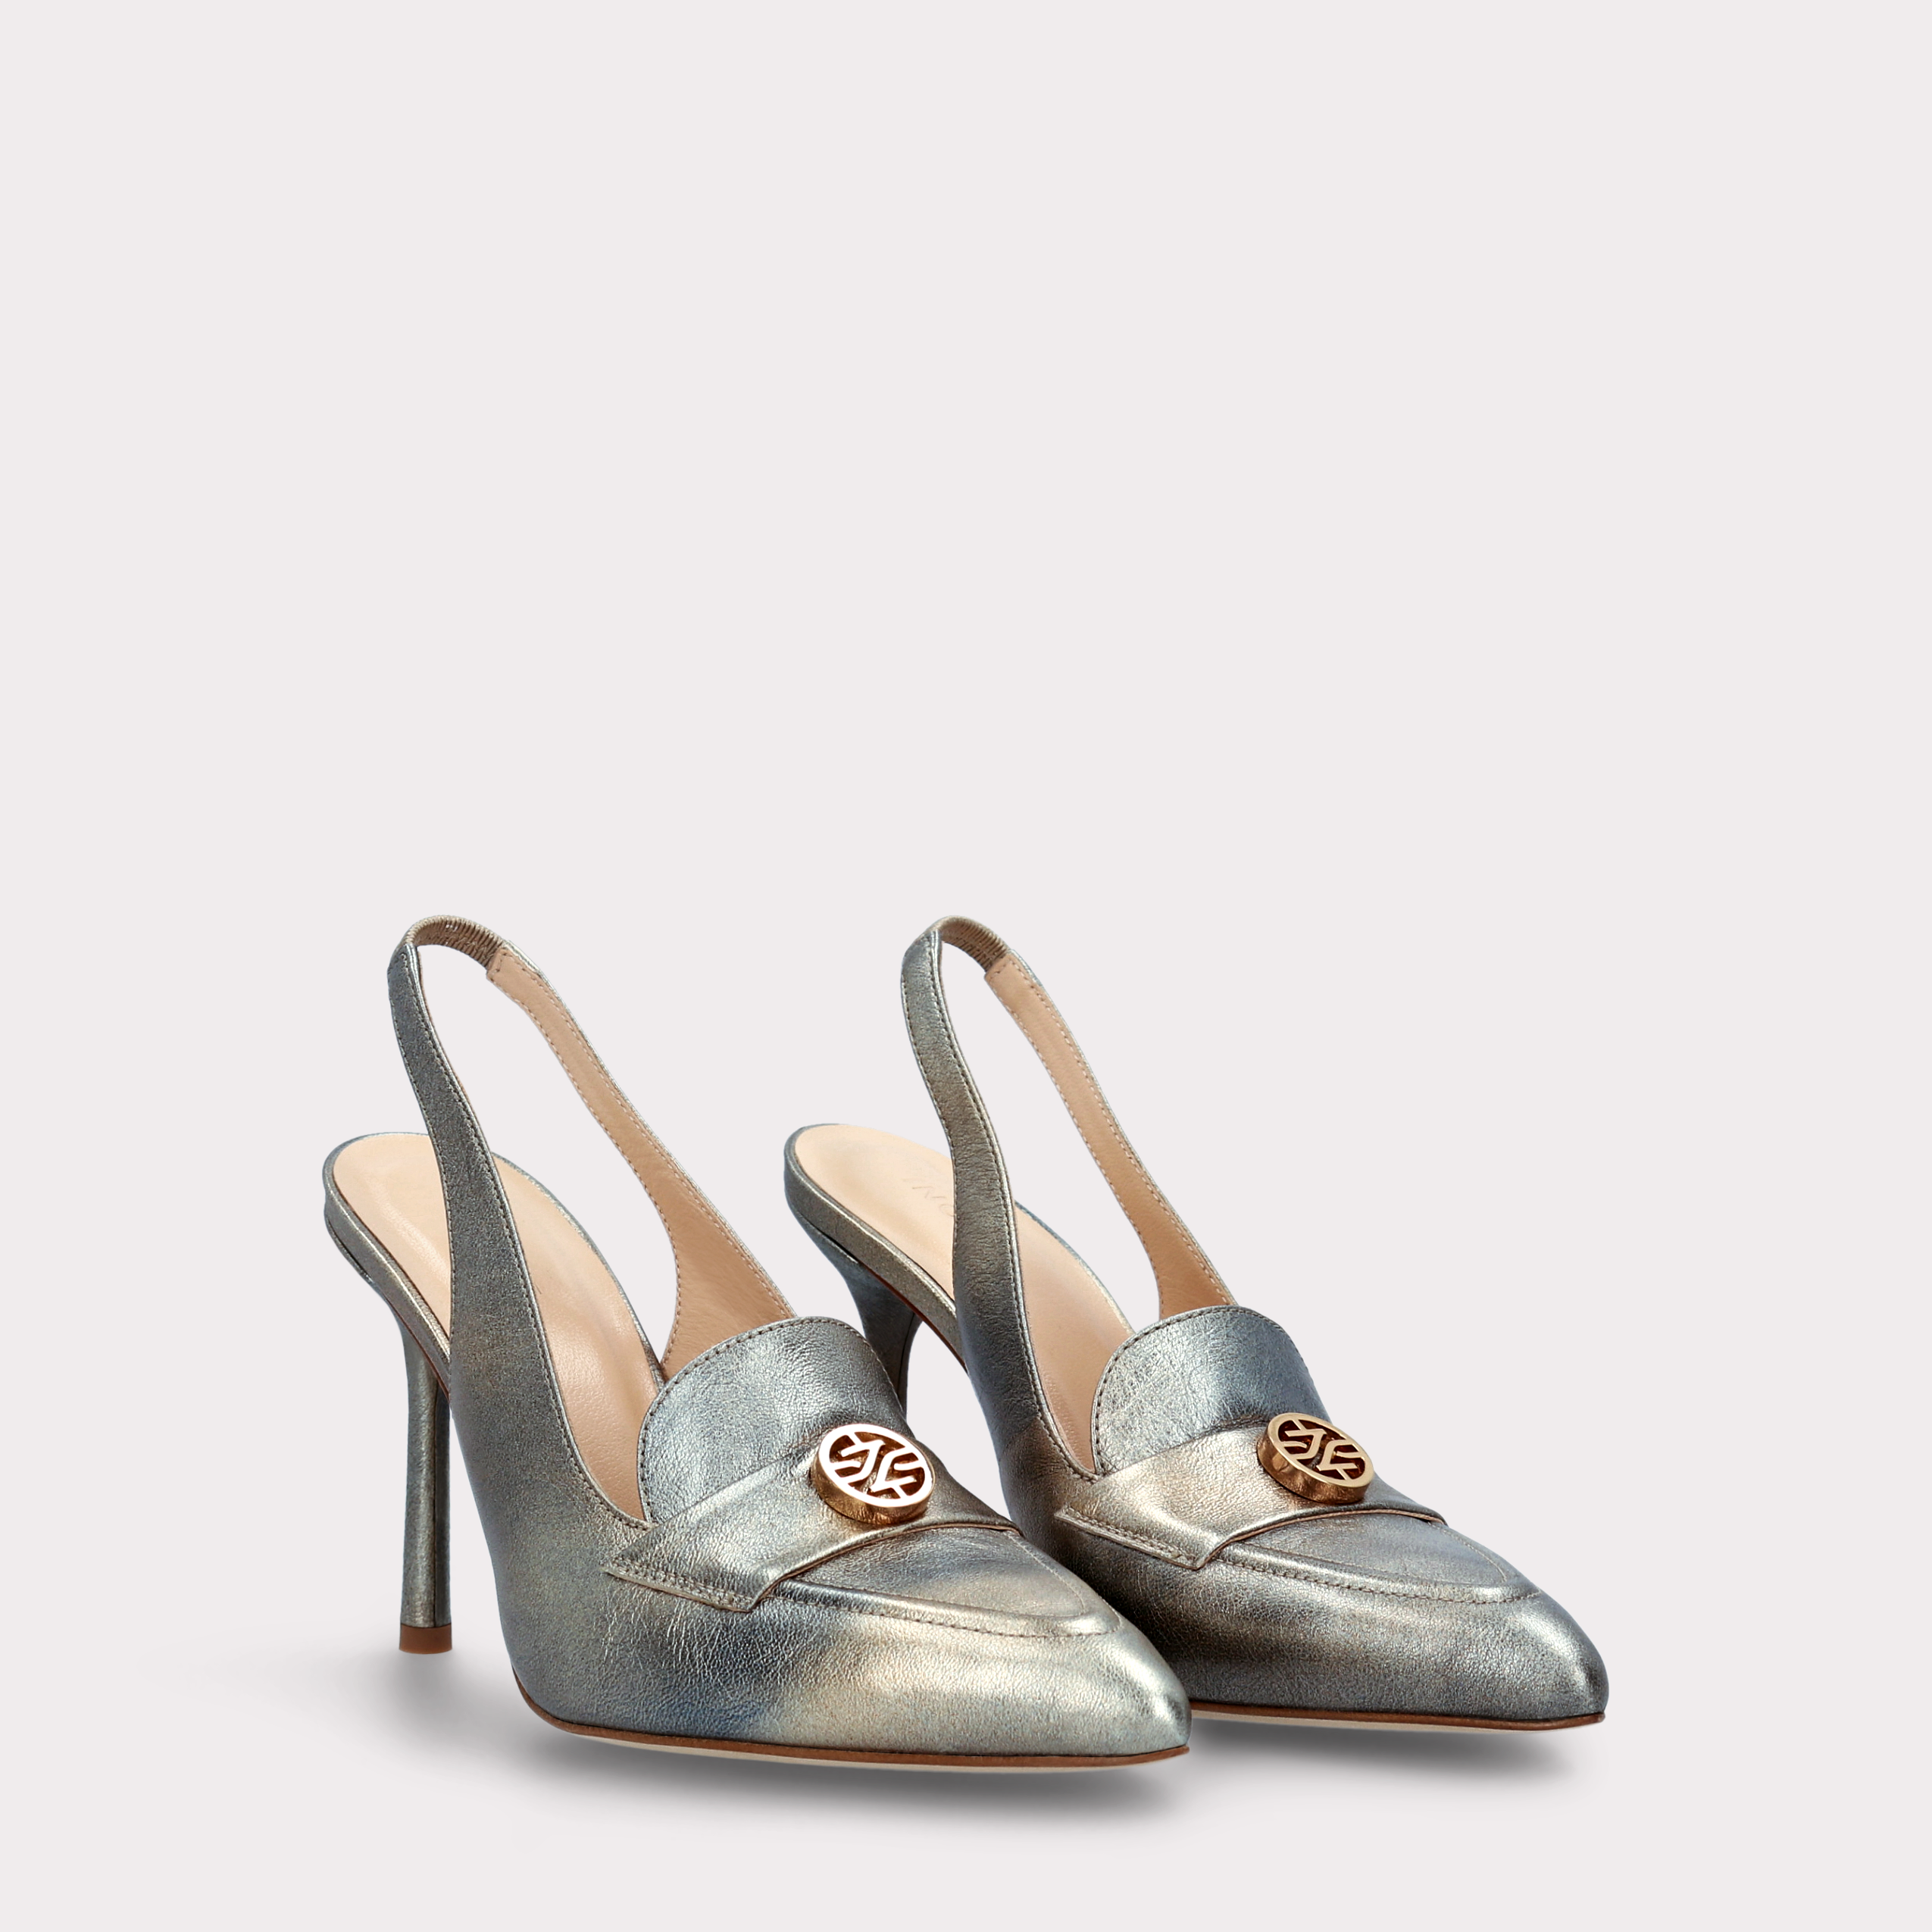 ABA 15 GREY LEATHER PUMPS